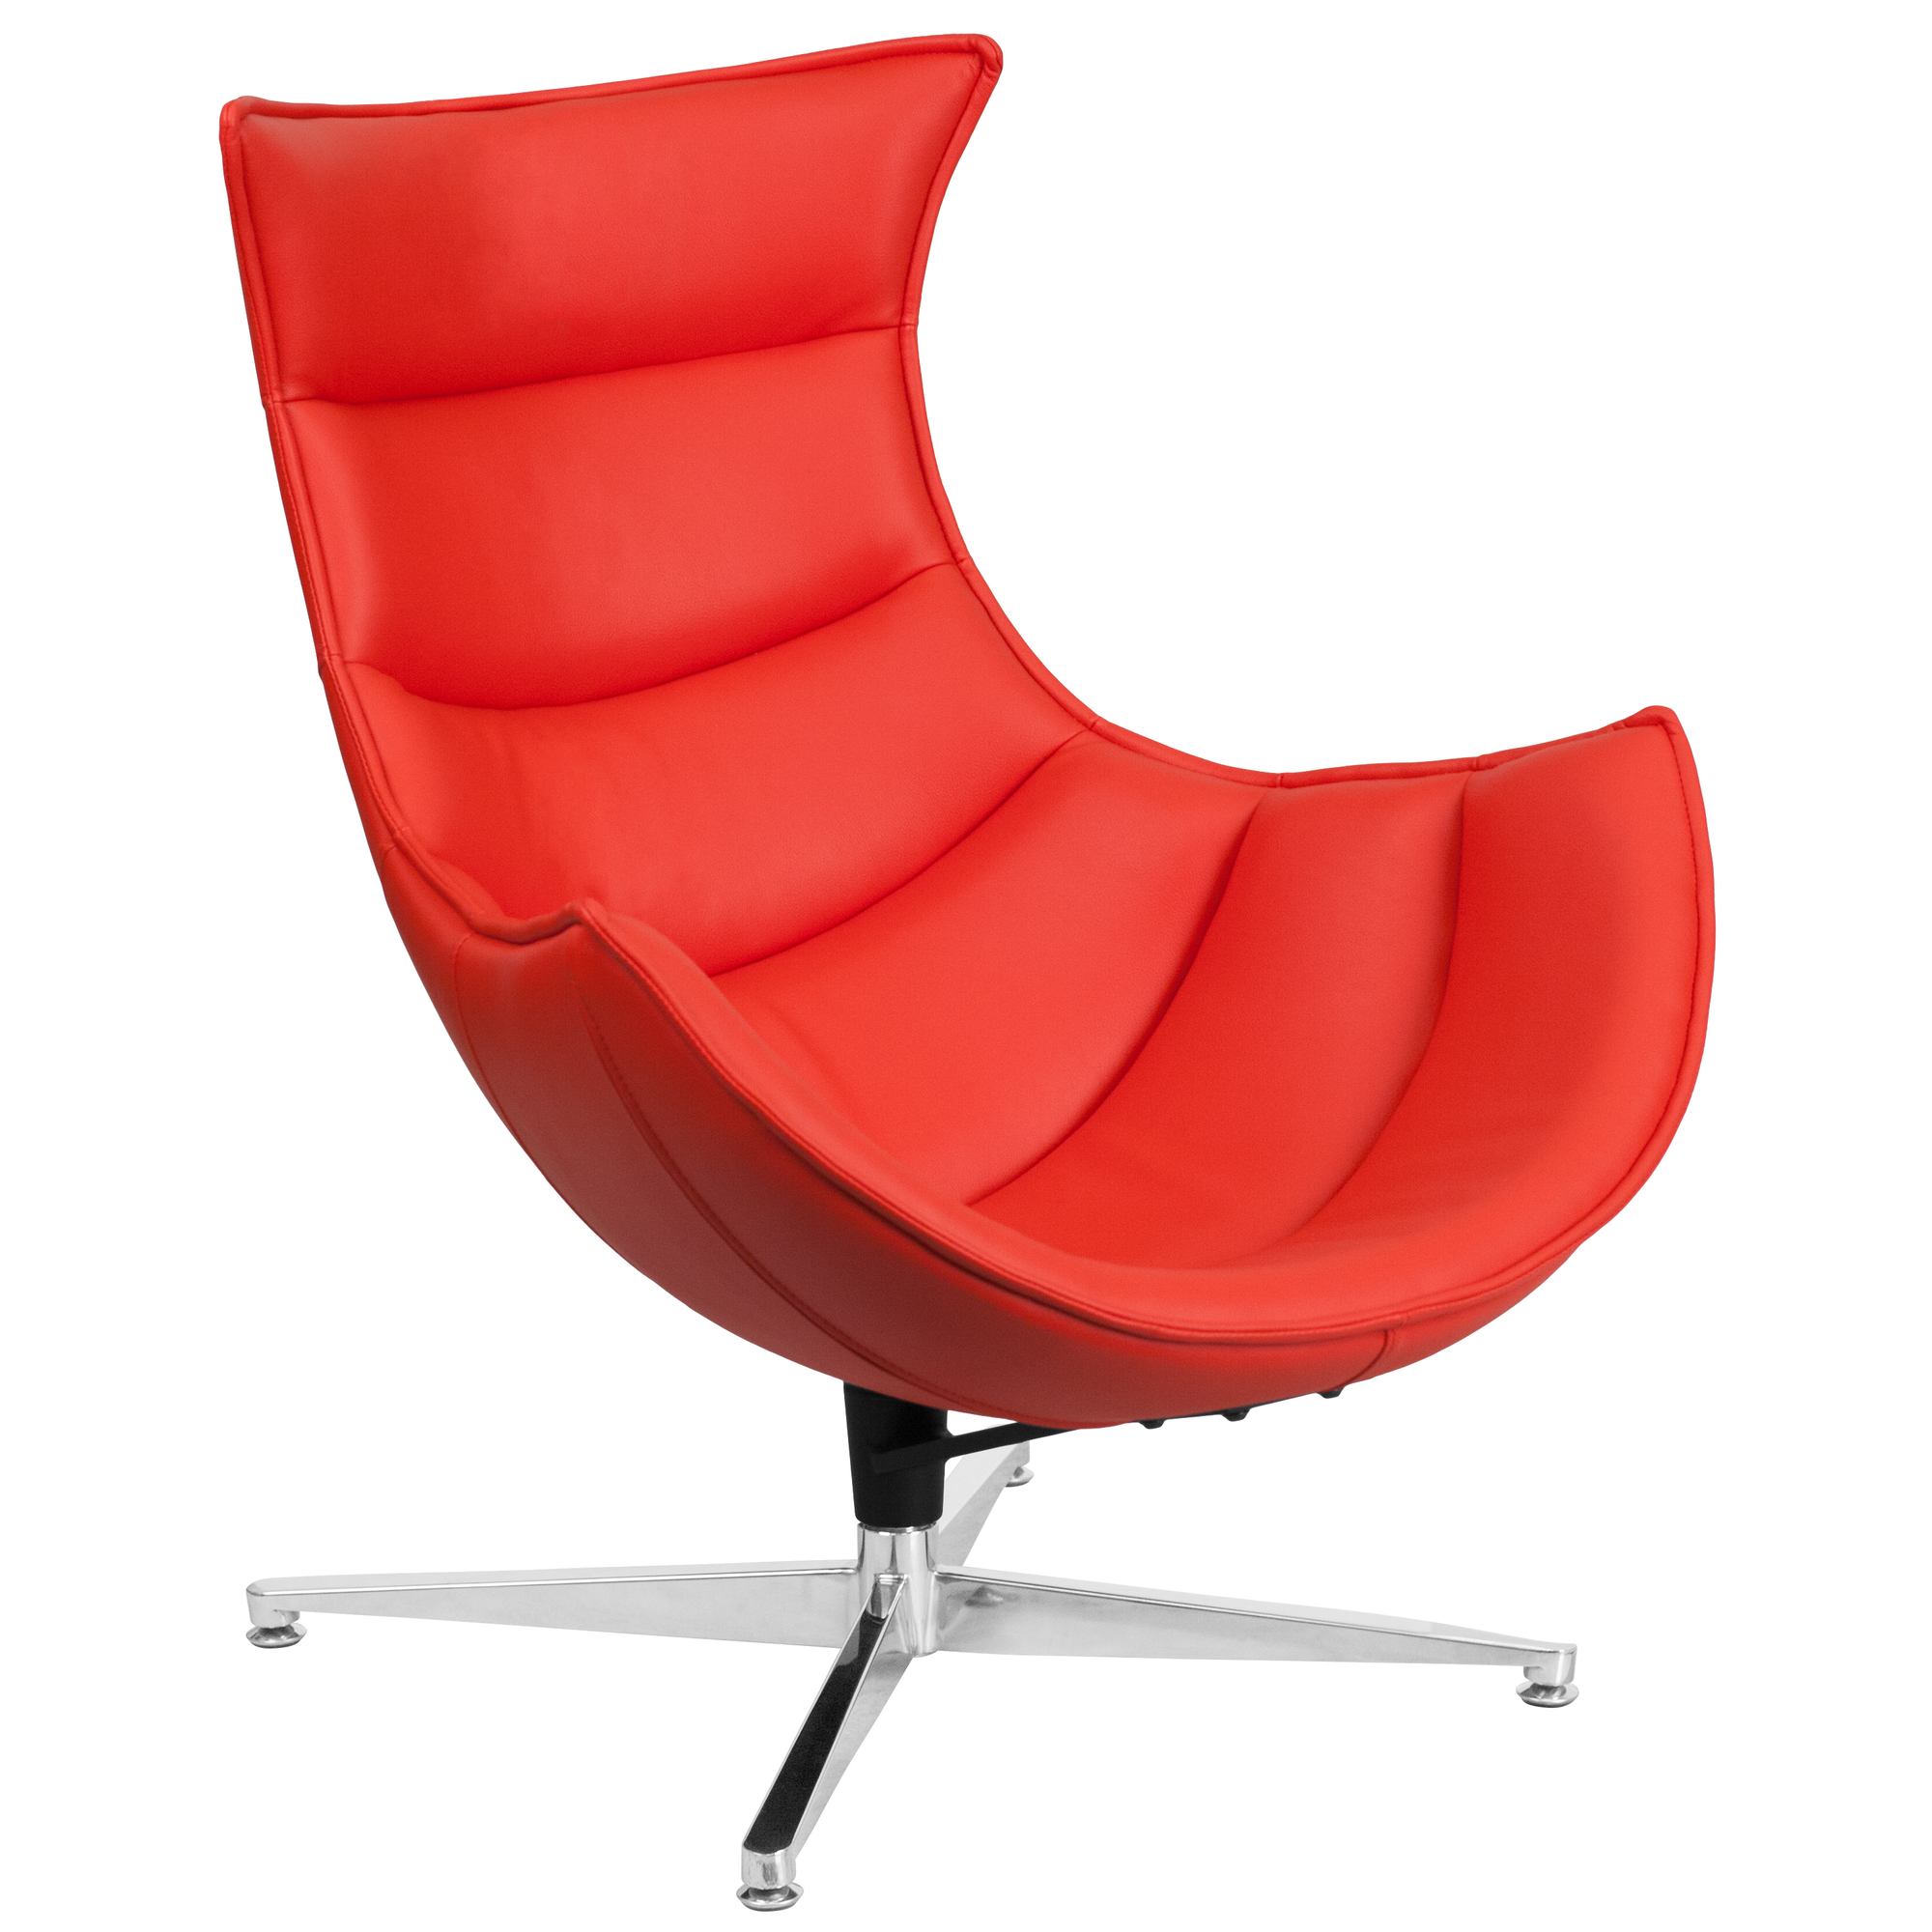 Flash Furniture, Red LeatherSoft Upholstered Swivel Cocoon Chair, Primary Color Red, Included (qty.) 1, Model ZB34